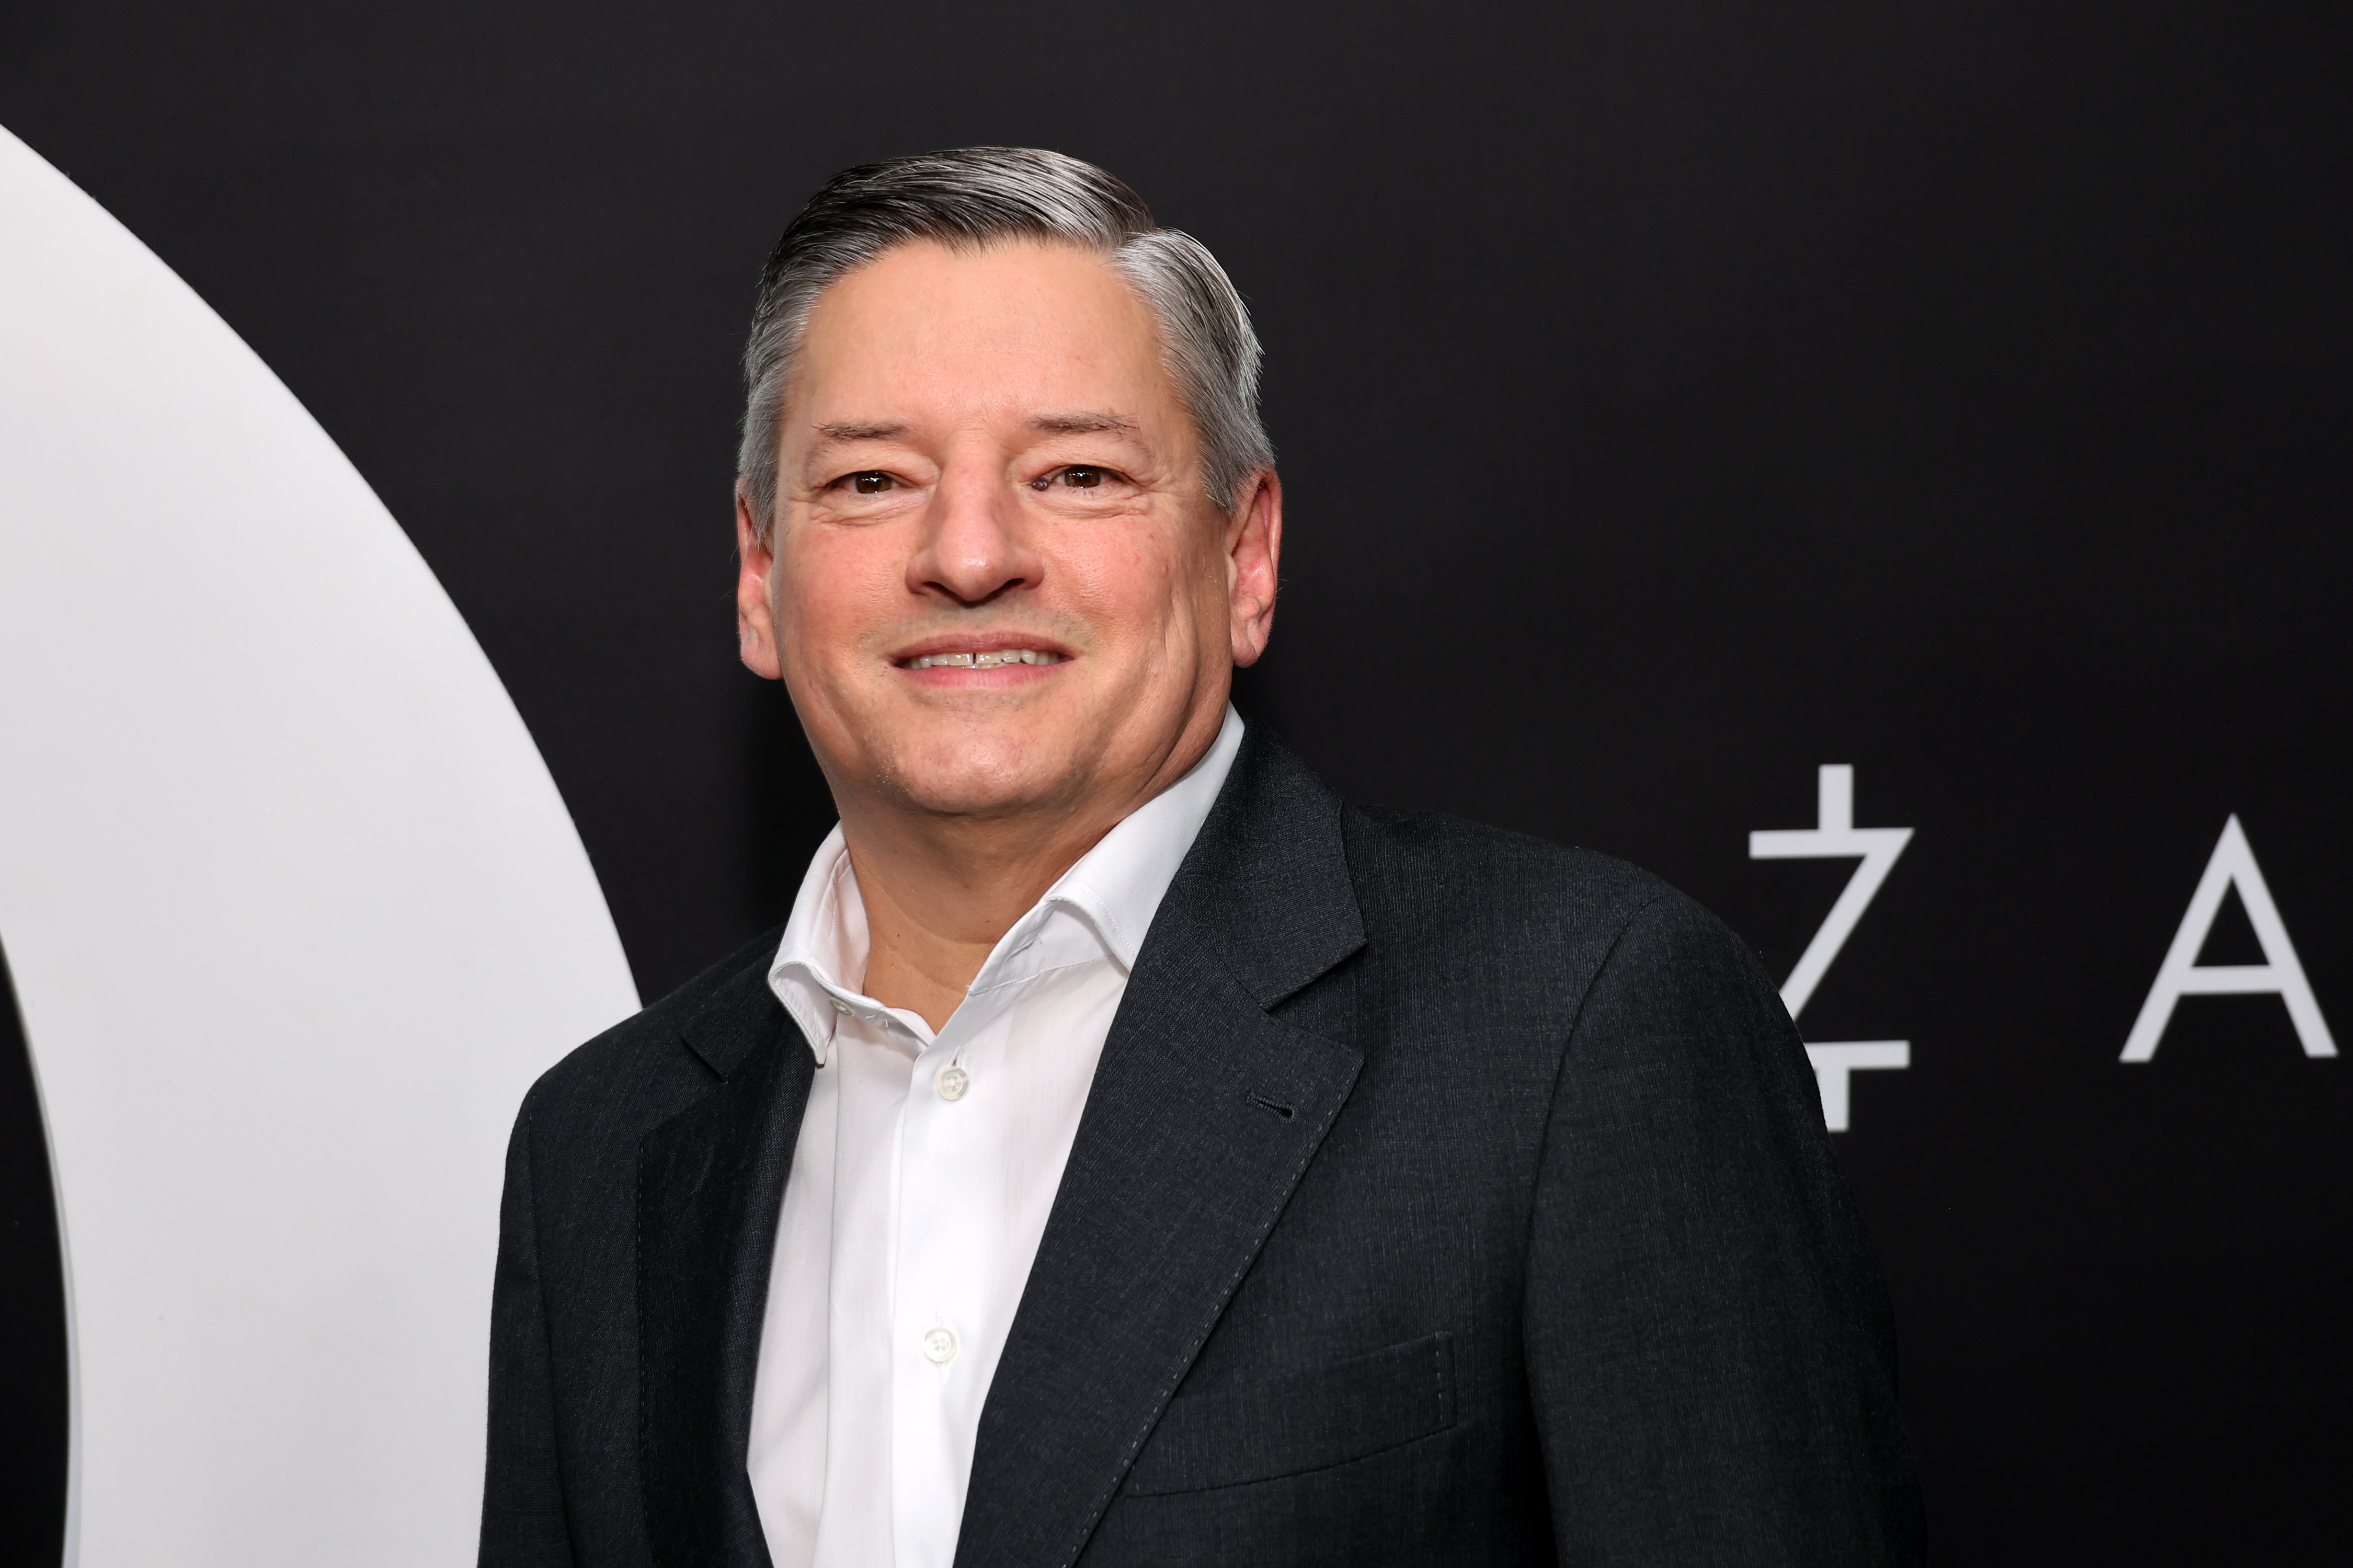 Co-CEO and Chief Content Officer at Netflix Ted Sarandos attends the "Ozark" Season 4 premiere on April 21, 2022 in New York City.